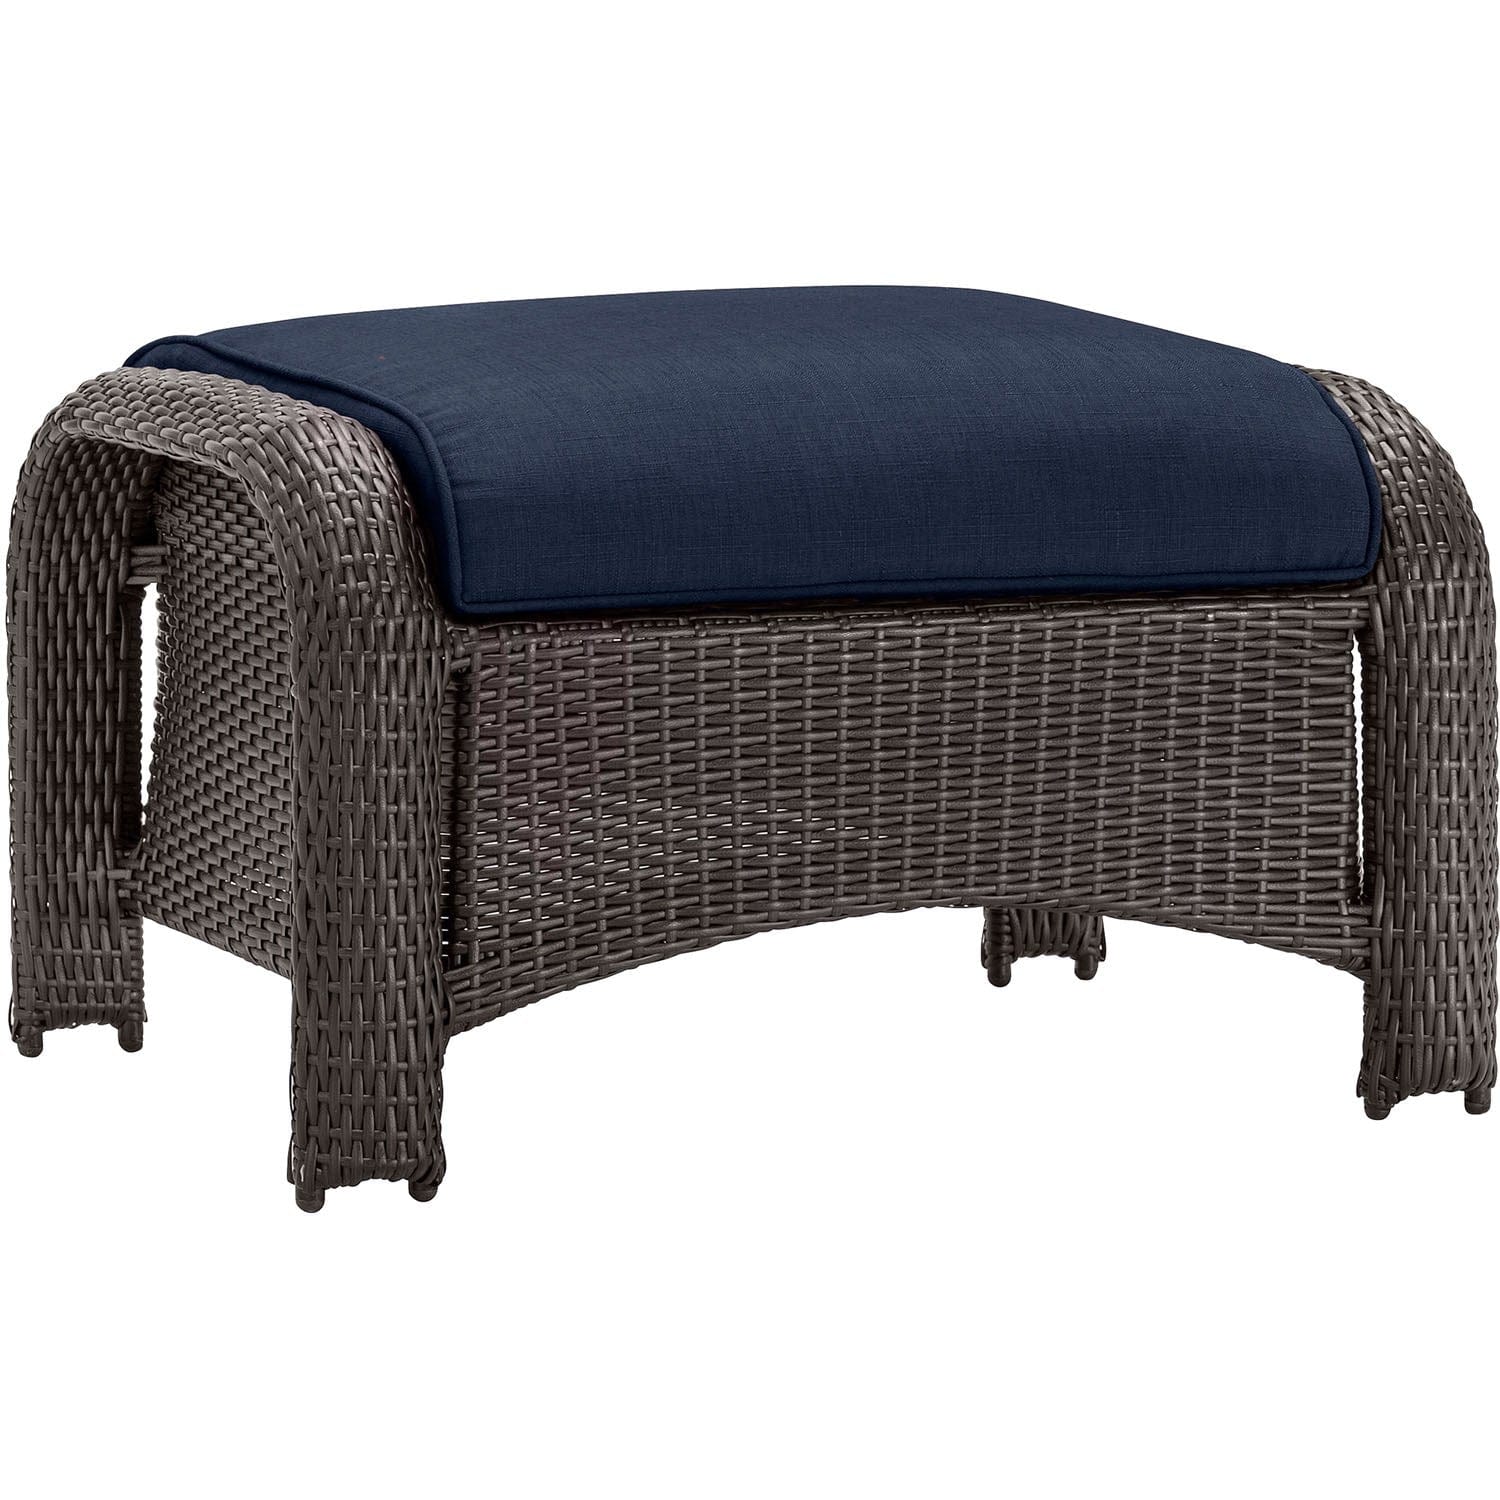 Hanover Fire Pit Chat Set Hanover - Strathmere 6-Piece Lounge Set in Navy Blue with Fire Pit Table | 36x44 | STRATH6PCFP-NVY-TN